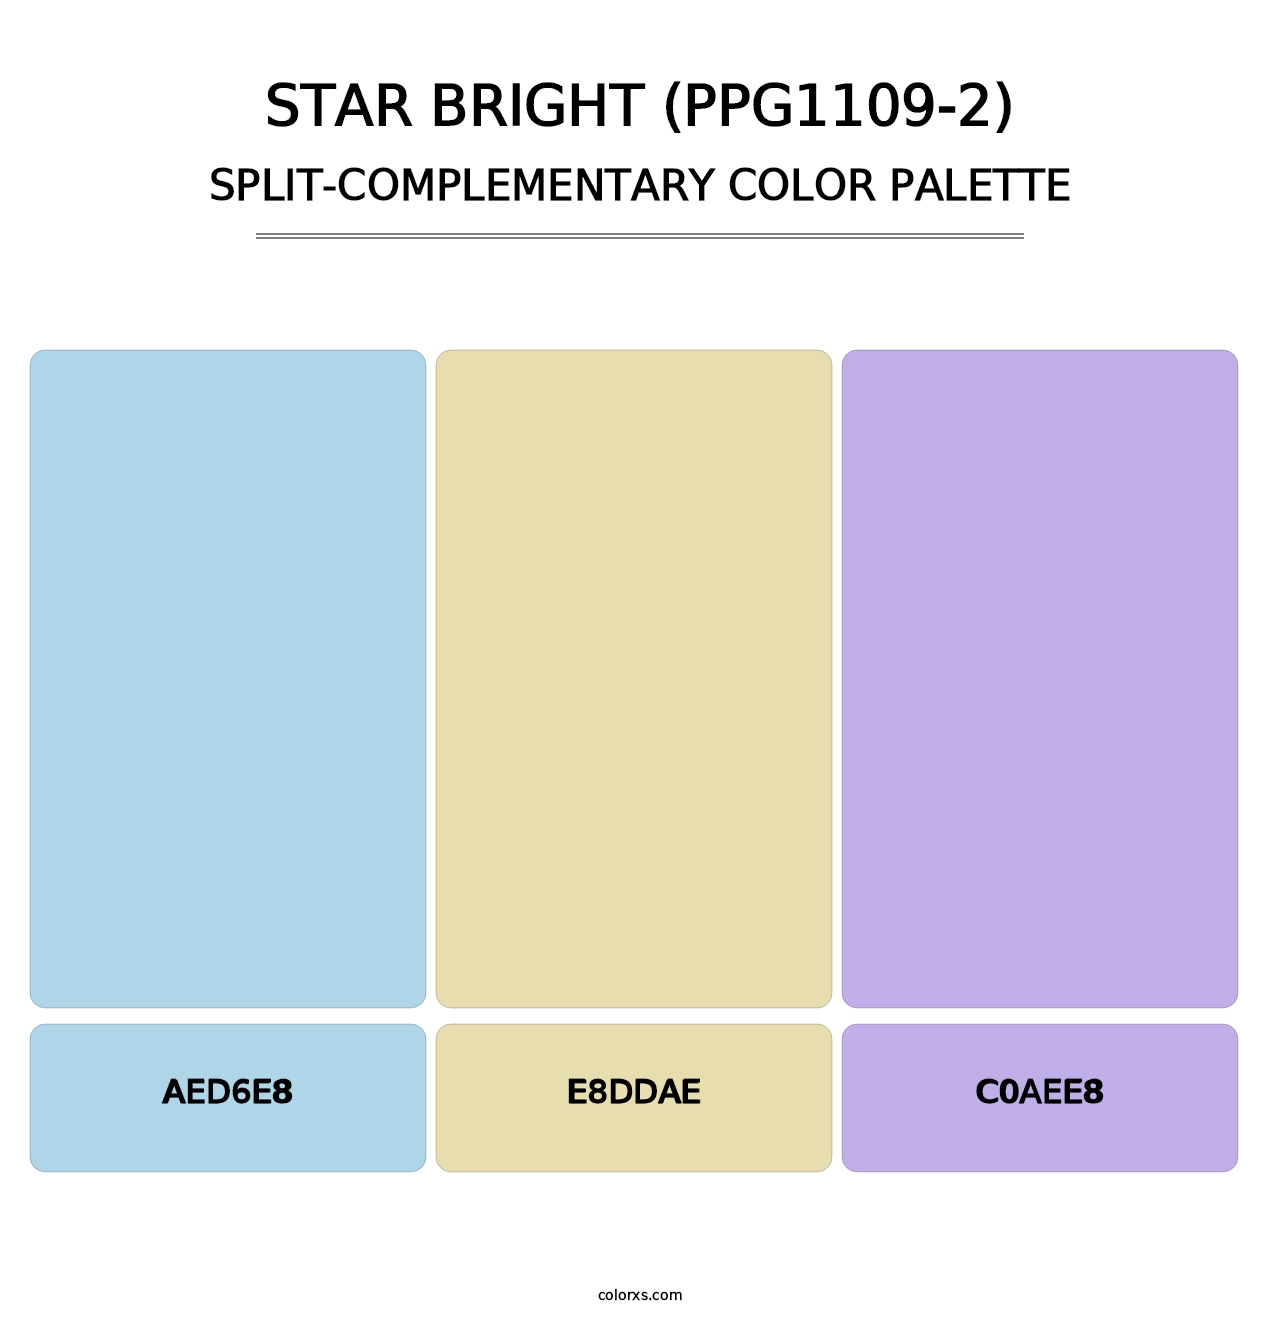 Star Bright (PPG1109-2) - Split-Complementary Color Palette